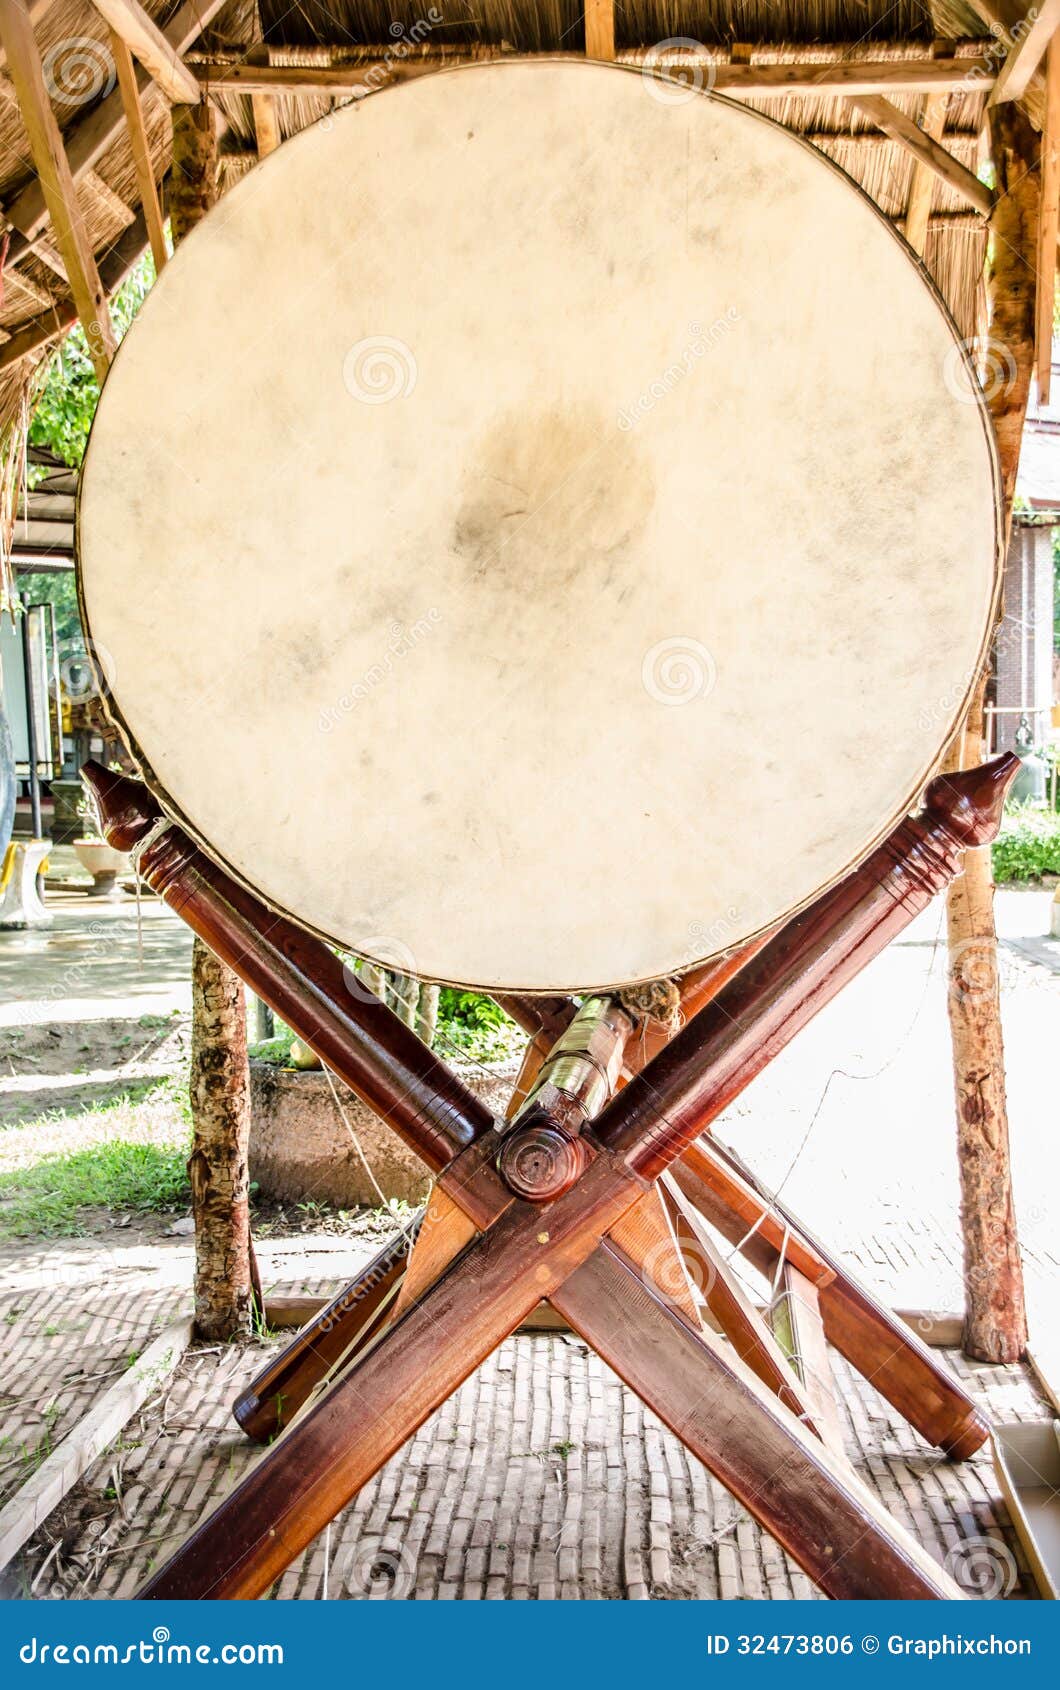 Drum stock photo. Image of render, percussion, single - 32473806